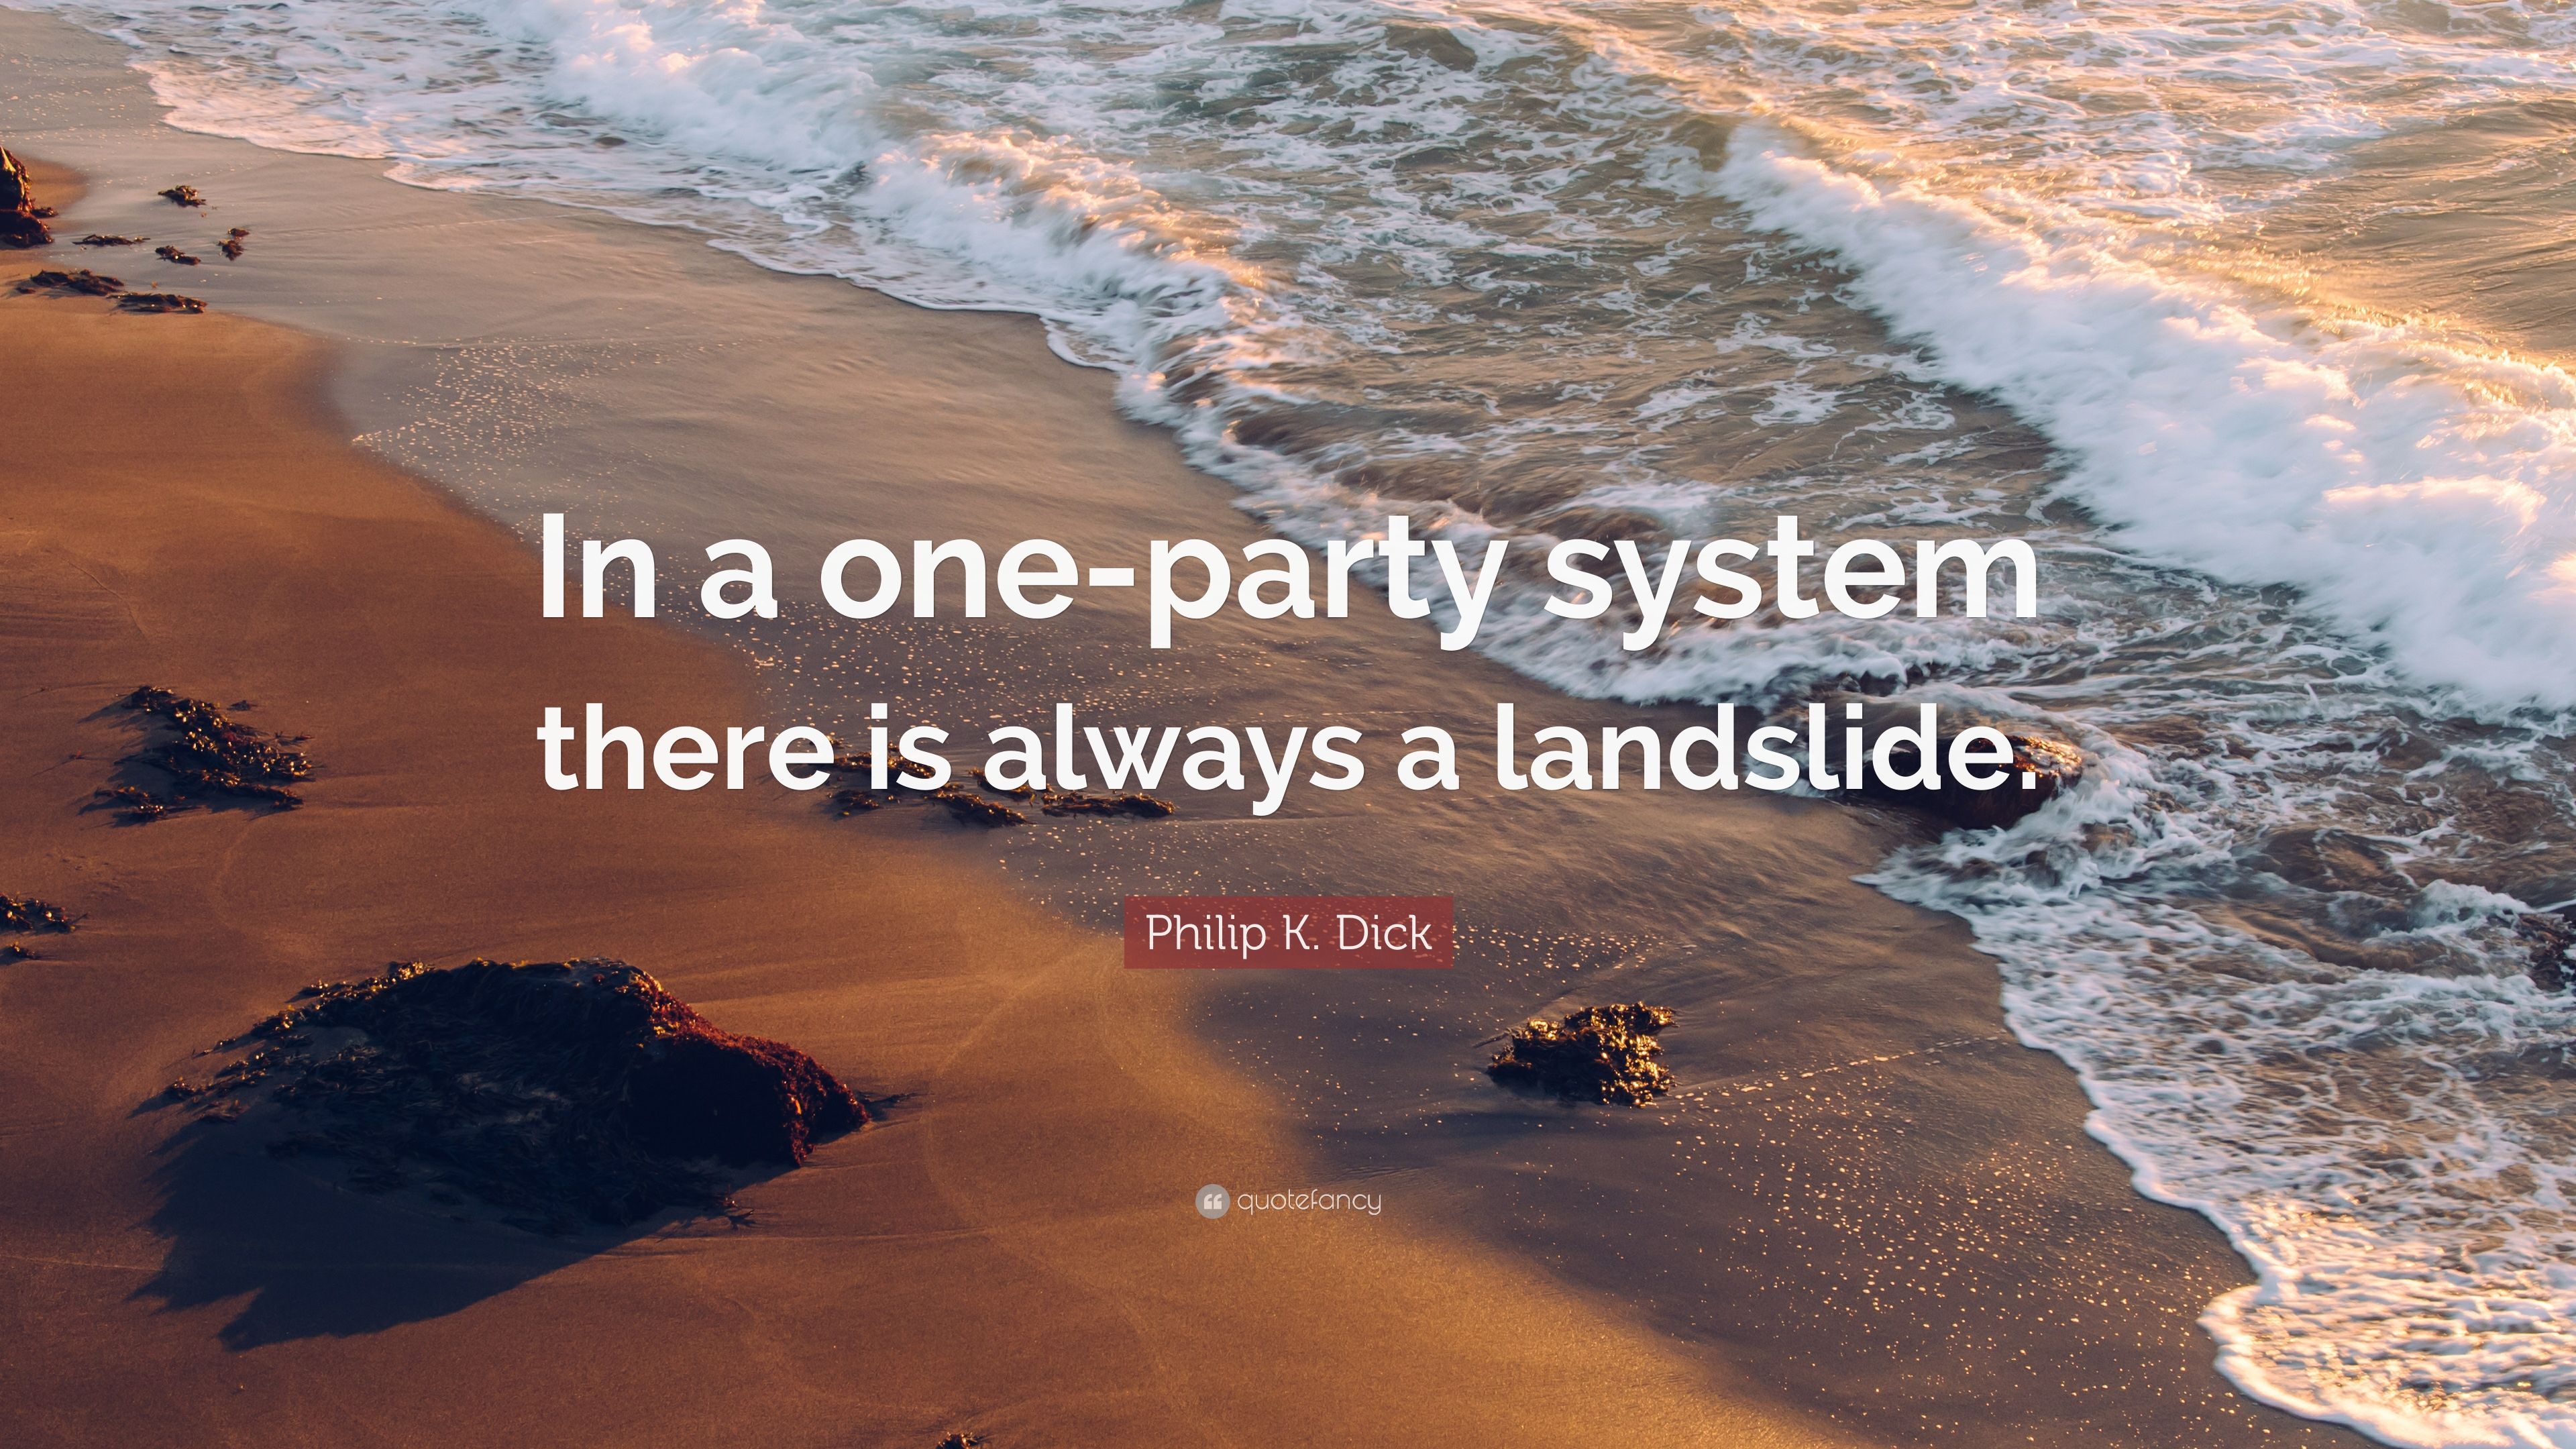 Philip K. Dick Quote: “In A One Party System There Is Always A